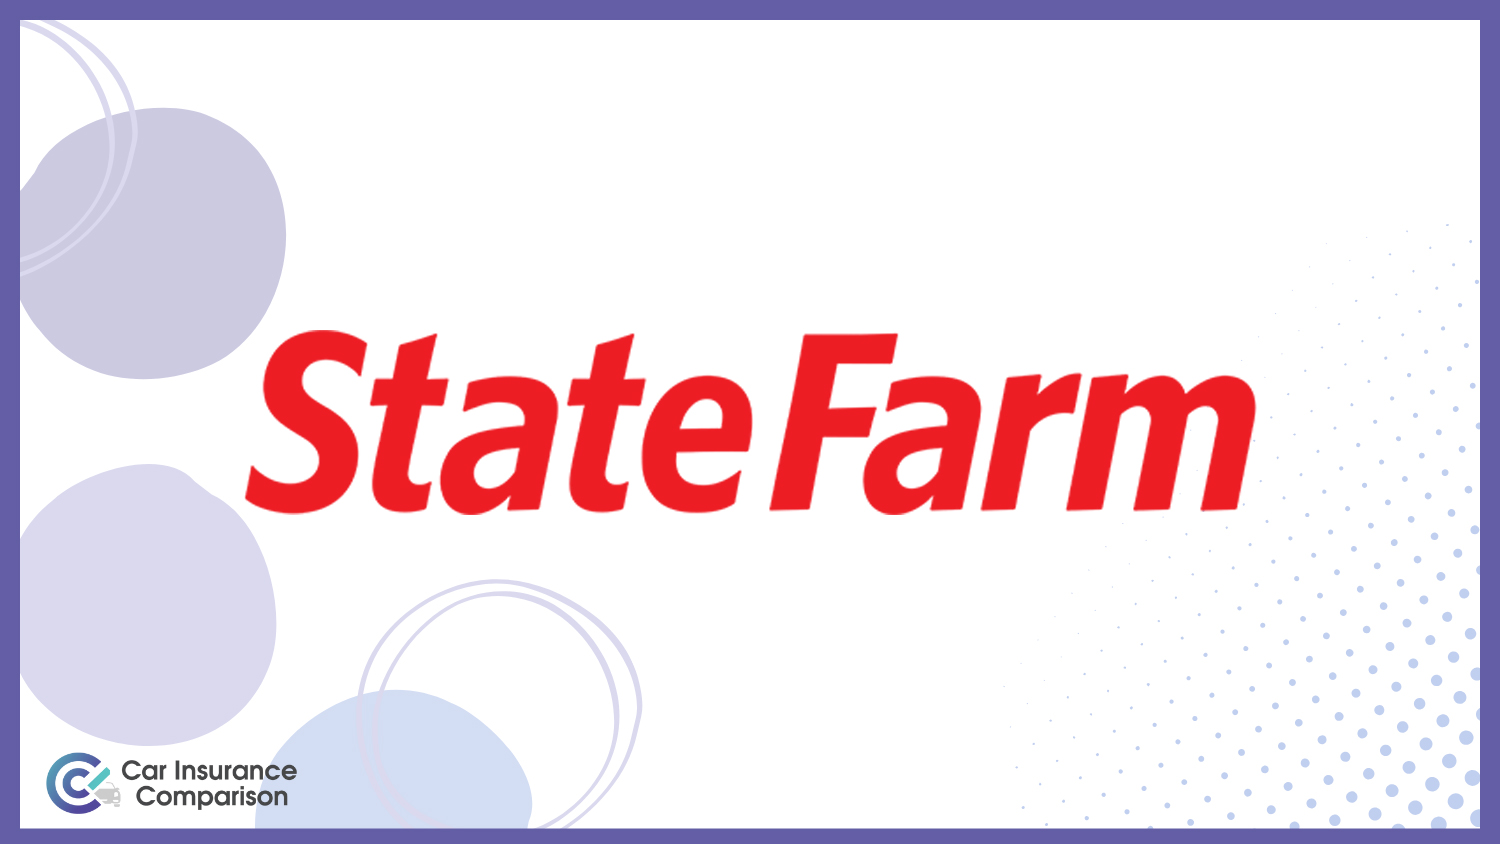 State Farm: Cheap Insurance for 2-Door Cars